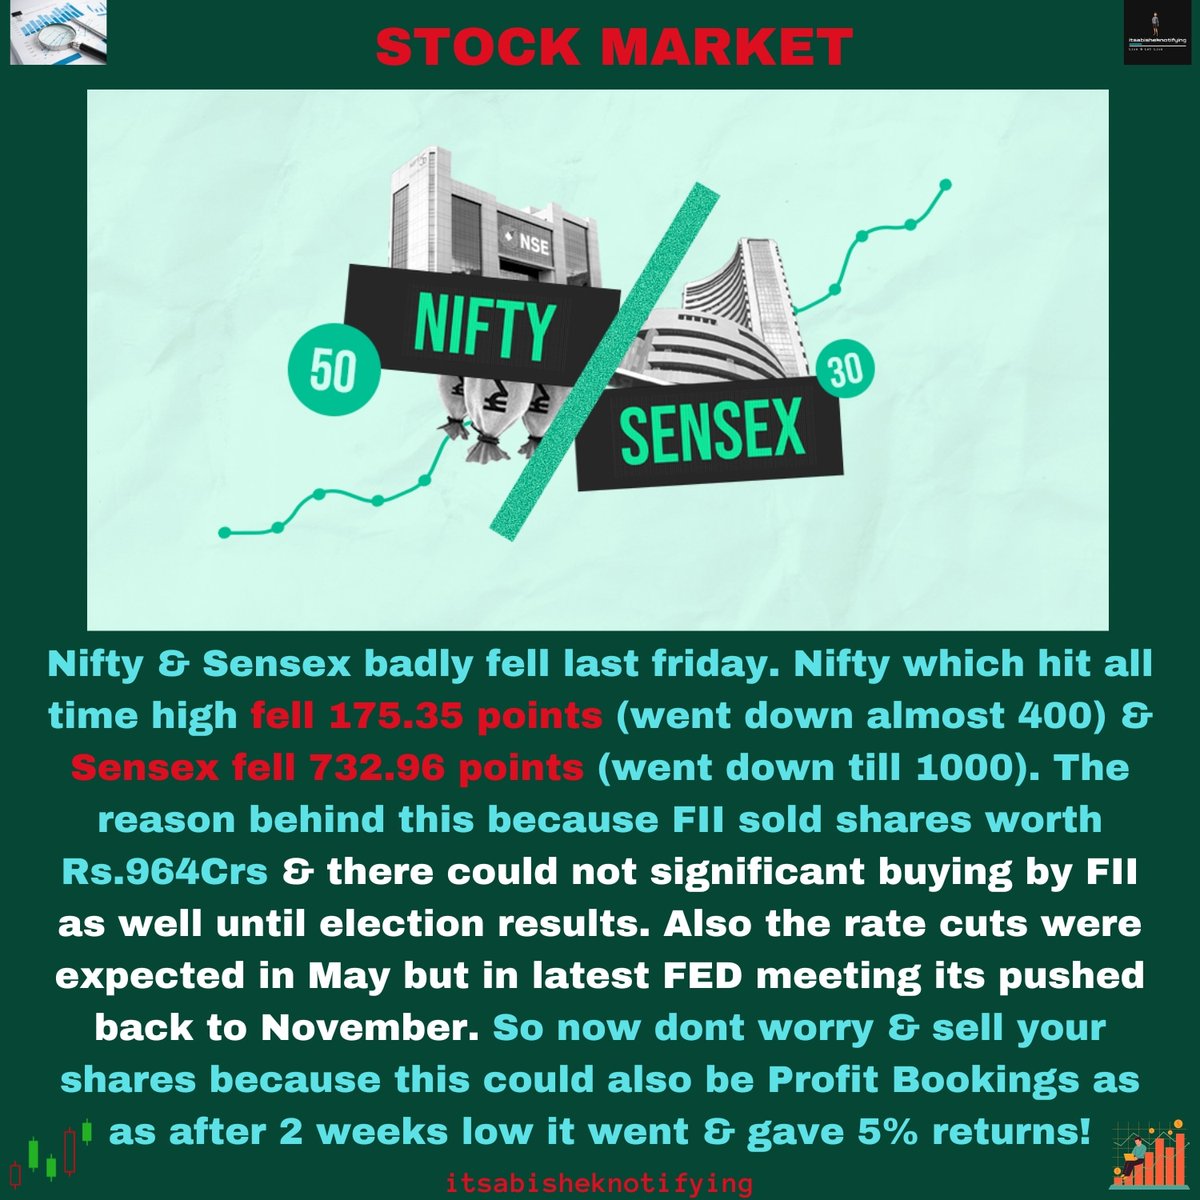 #Nifty & #Sensex are falling continuously as there is a slight #StockMarketCrash as the stocks are highly over valued due to illegal dealings of promoters & the share brokers & other side the Q4 results were out.

#StockMarket #StockMarketIndia #StockMarketNews #StockTrading